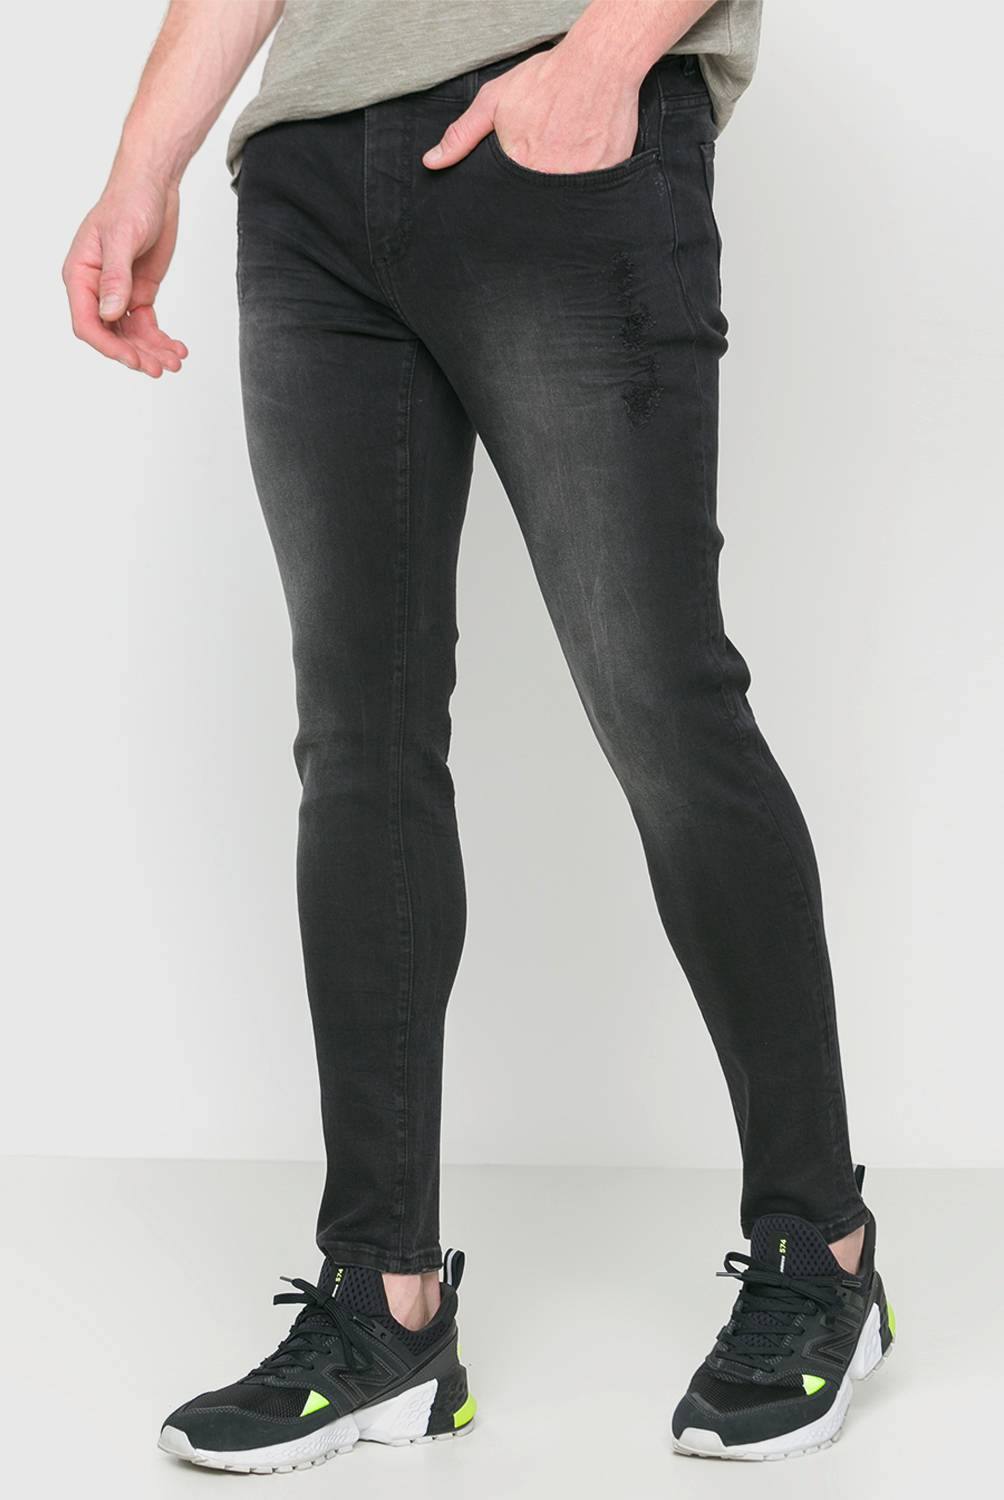 MOSSIMO - Jeans Hombre